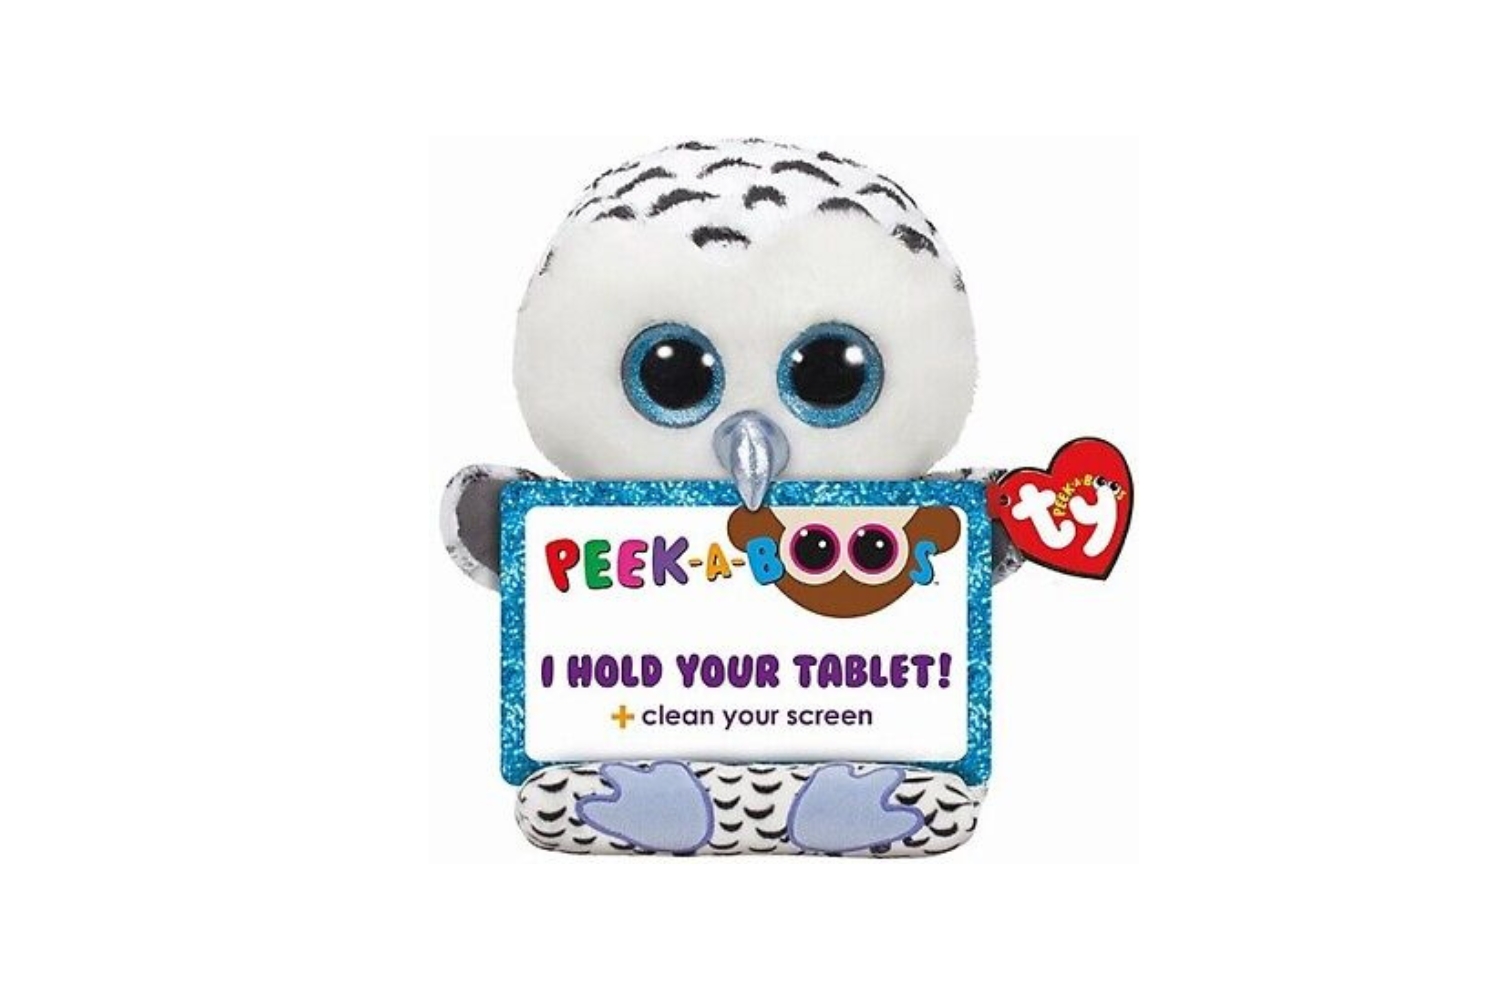 Where To Buy Ty Peek A Boo Tablet Holder